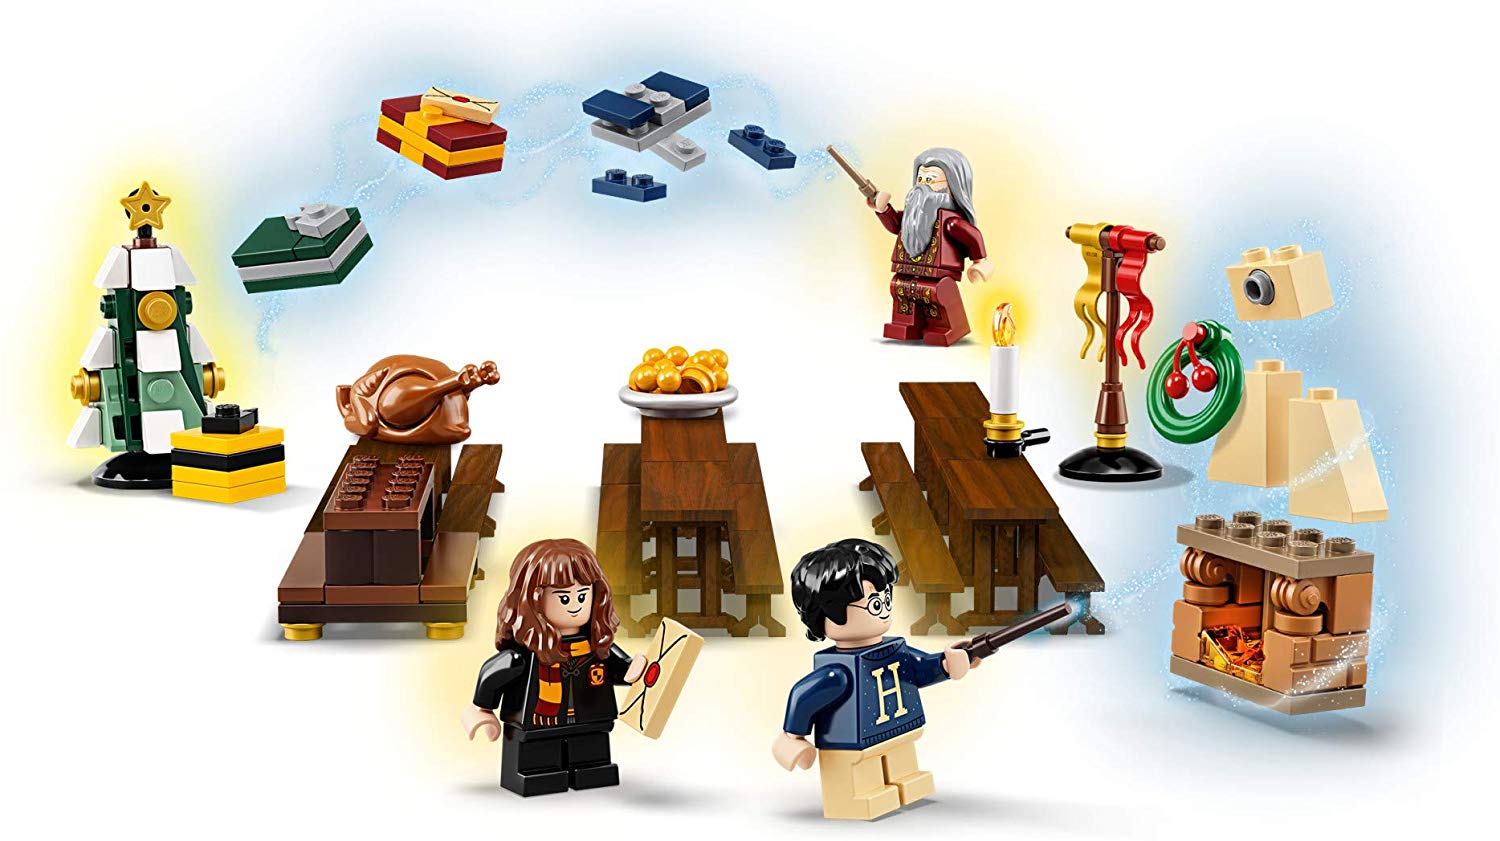 Lego Harry Potter: accessories and minifigures